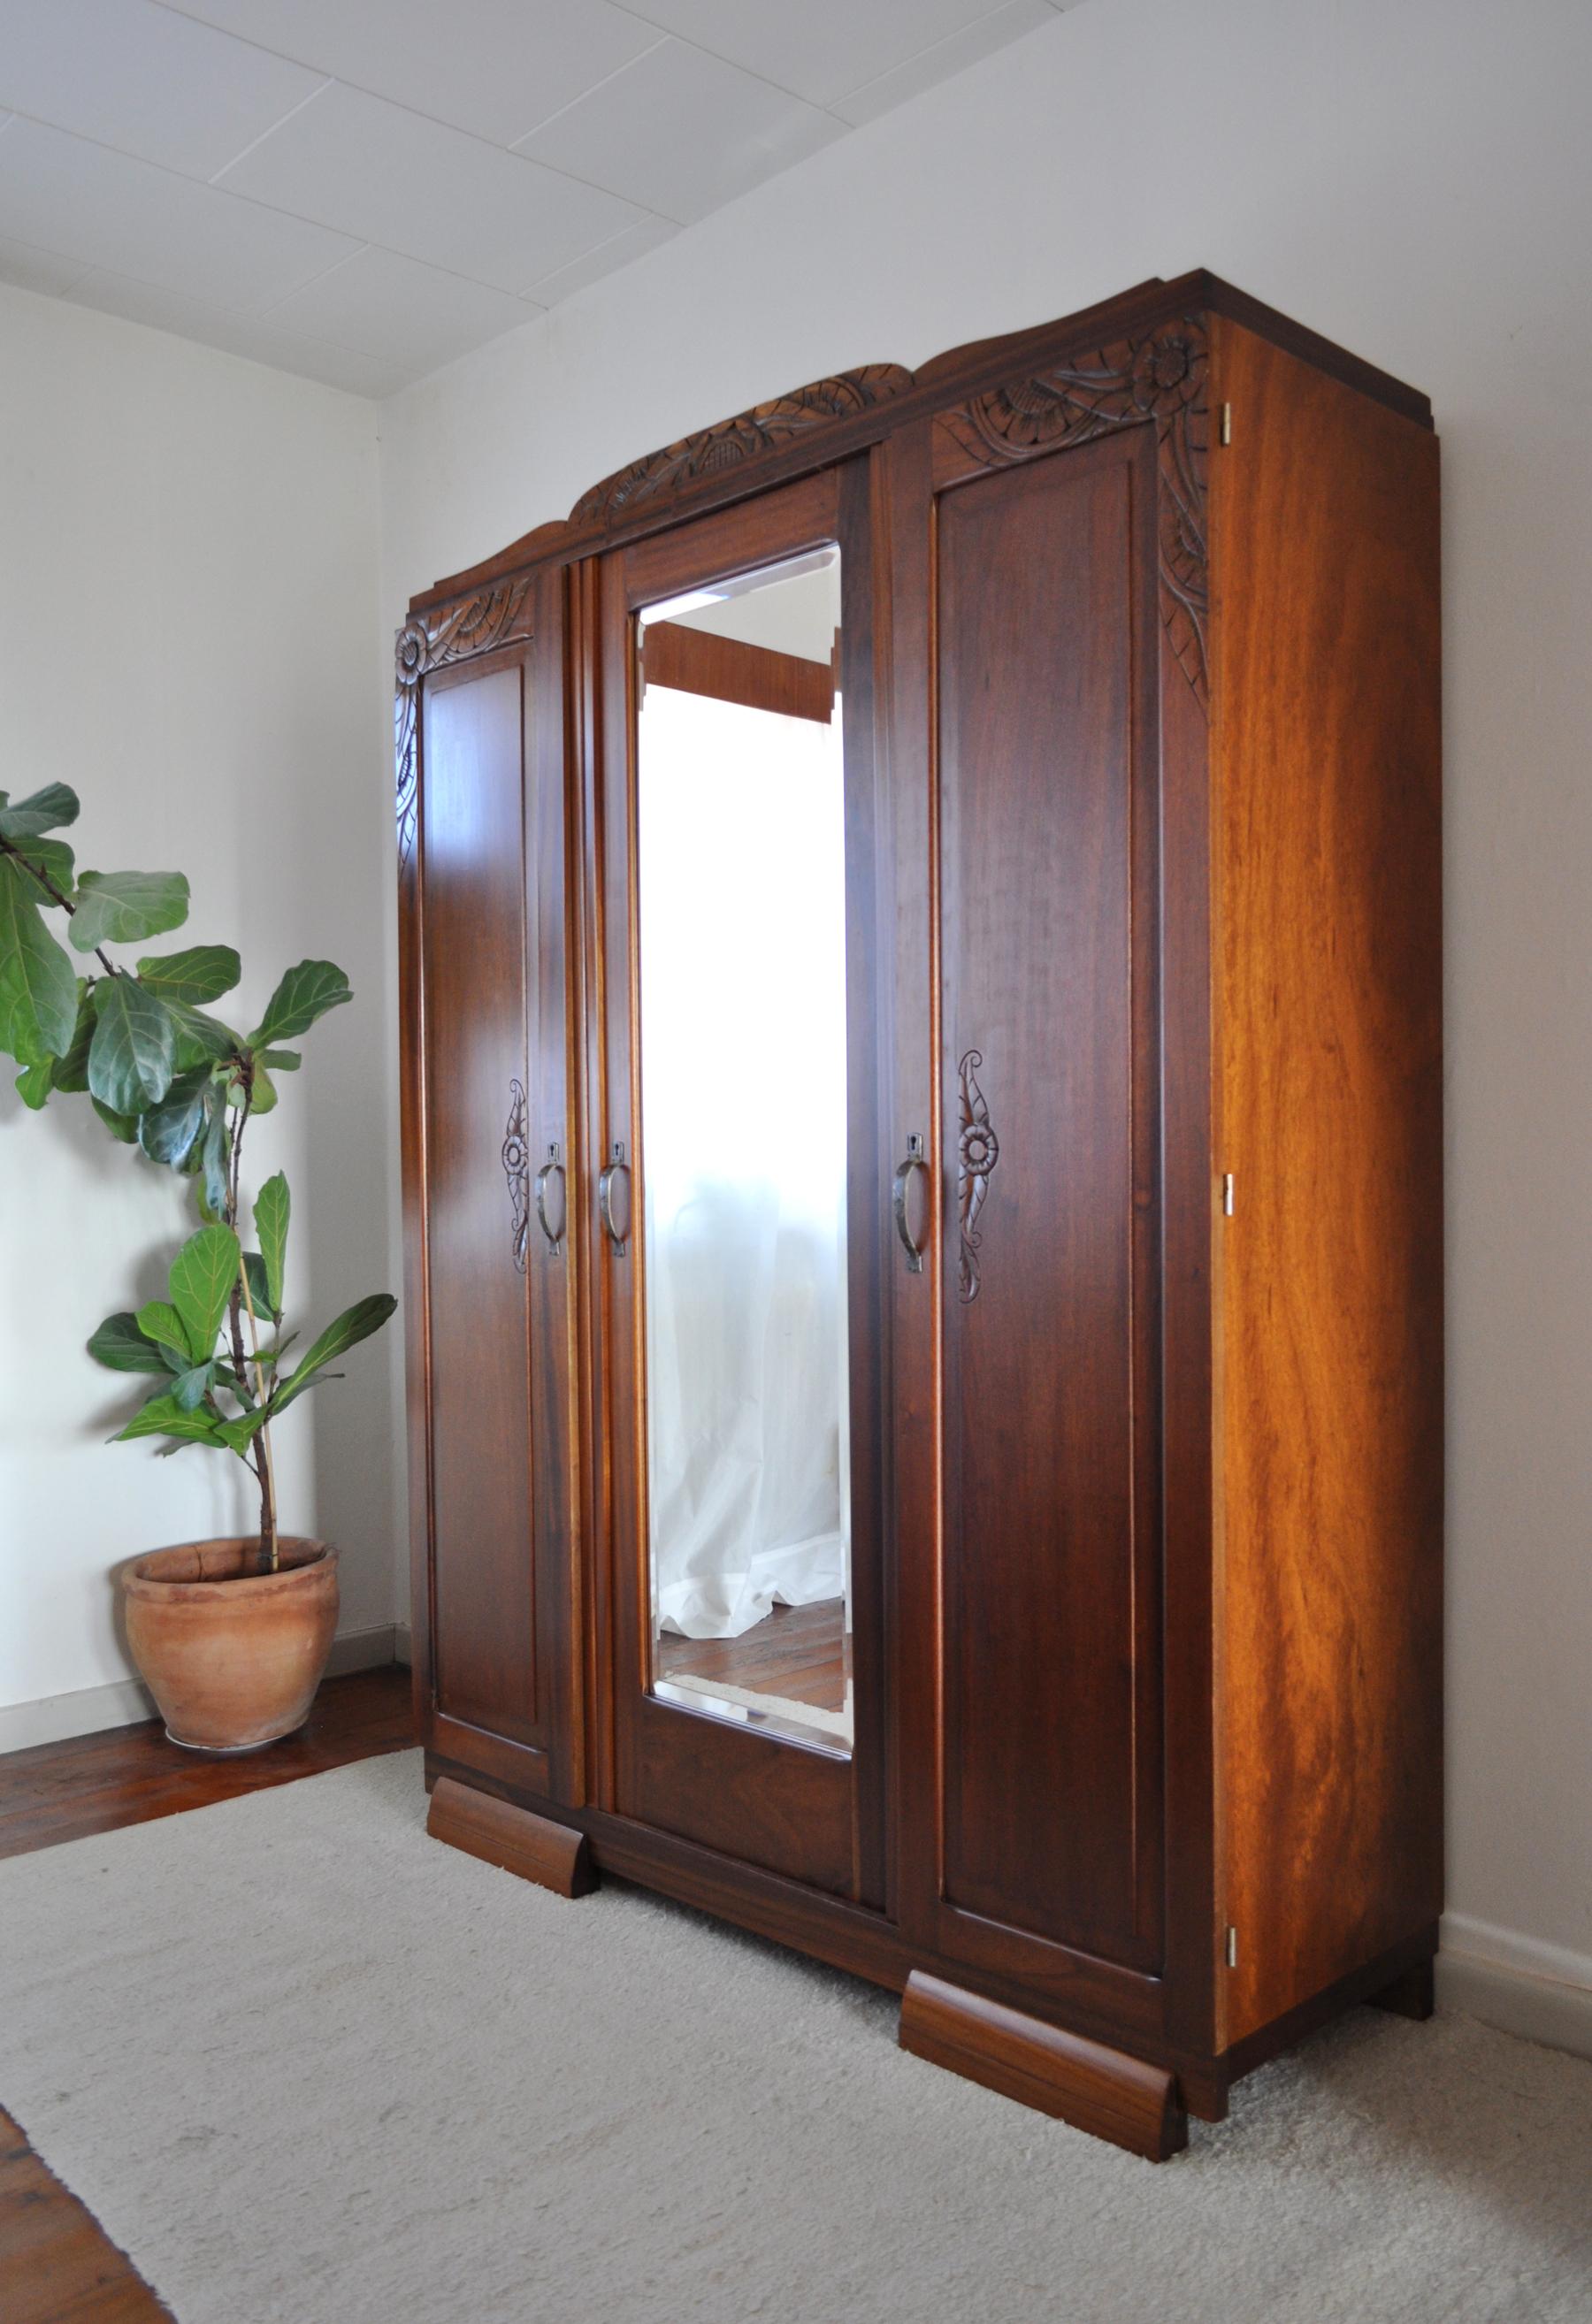 French Art Deco three-door cabinet in solid mahogany. Individually carved floral ornamentations, three shelves and a drawer. Faceted mirror and patinated brass handles.
Can be shipped disassembled.